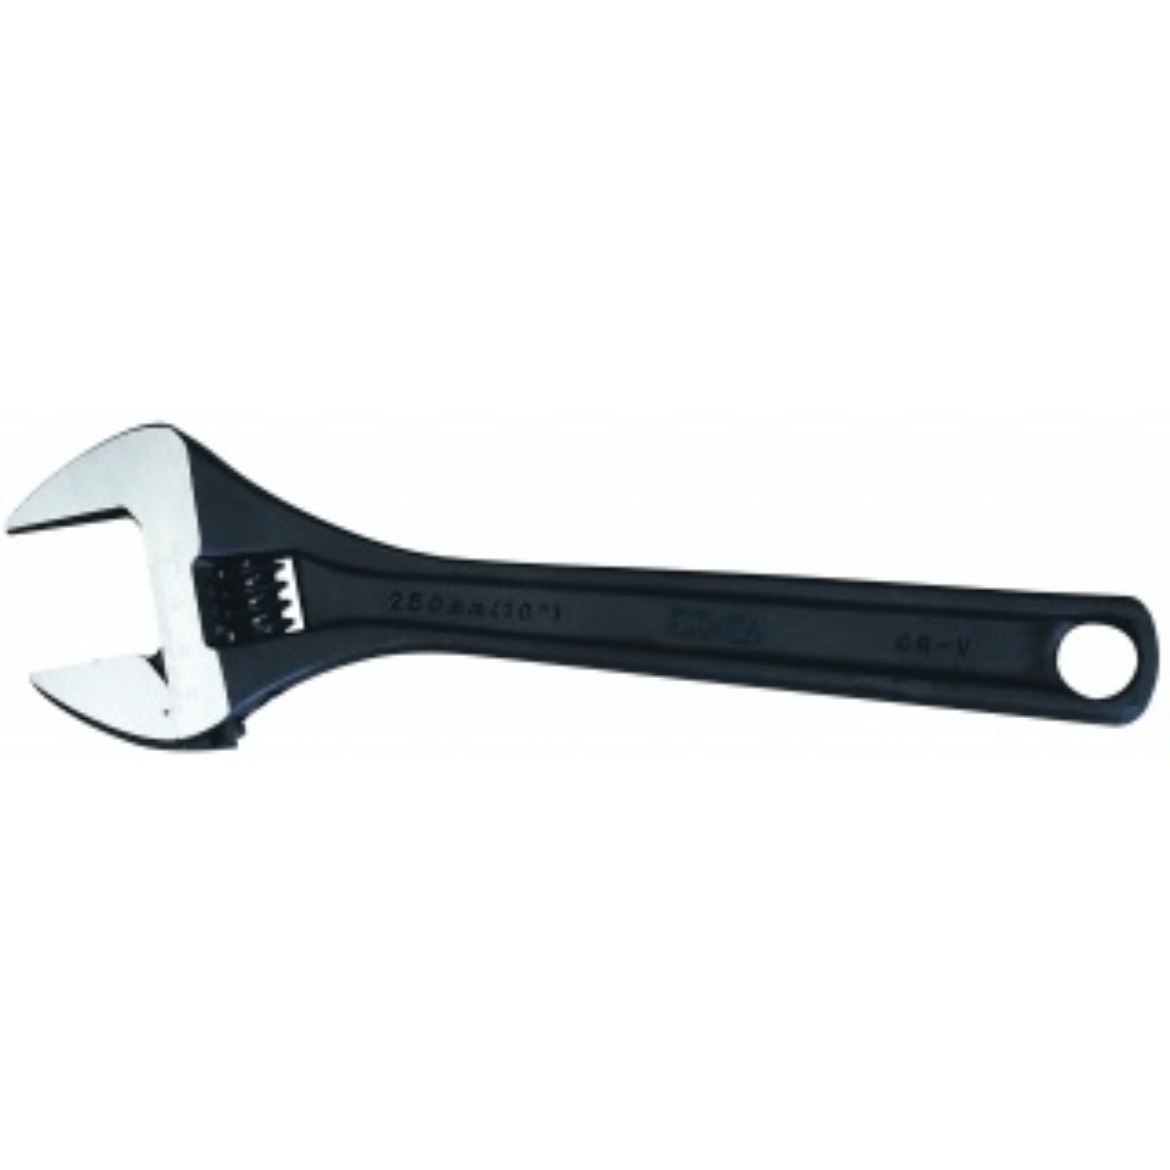 Picture of WRENCH ADJUSTABLE WIDE JAW PREMIUM BLACK 600MM SP TOOLS